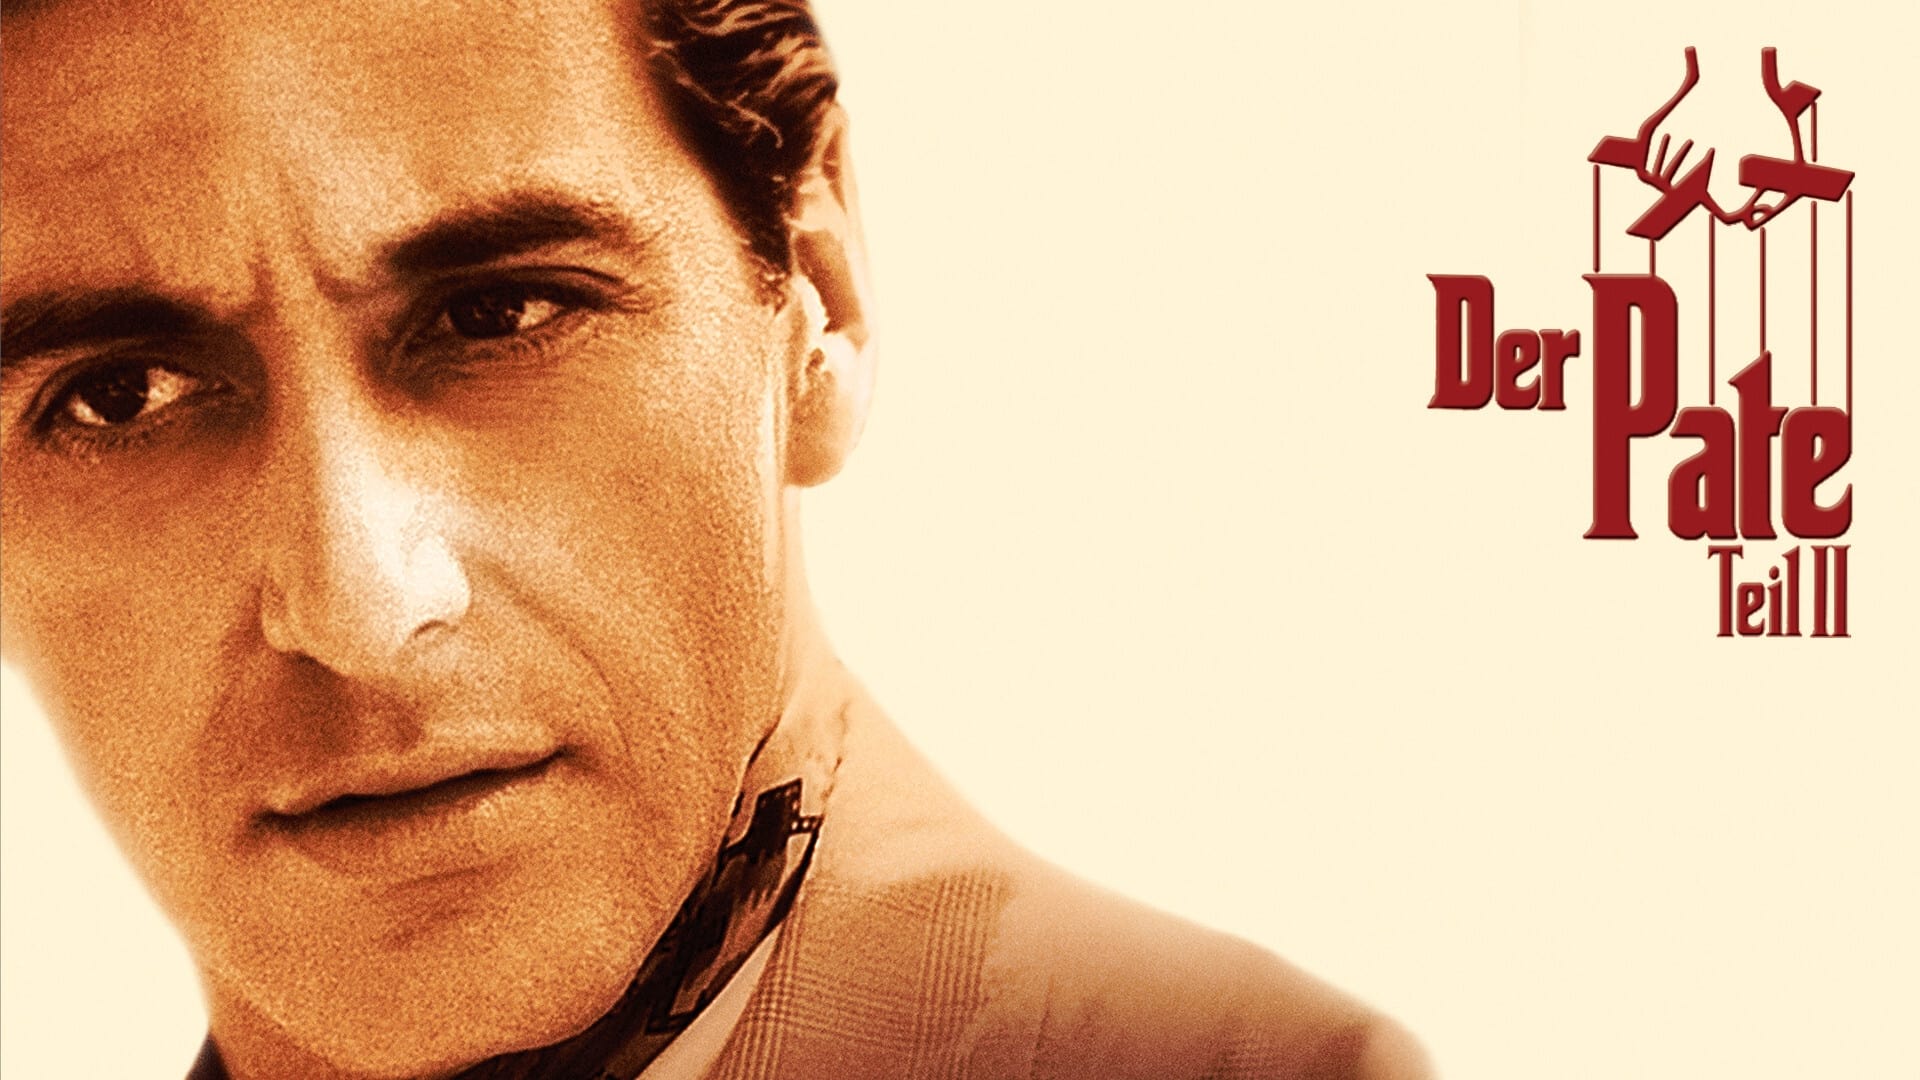 Watch The Godfather Part II (1974) Full Movie Online Free | Stream Free Movies & TV Shows